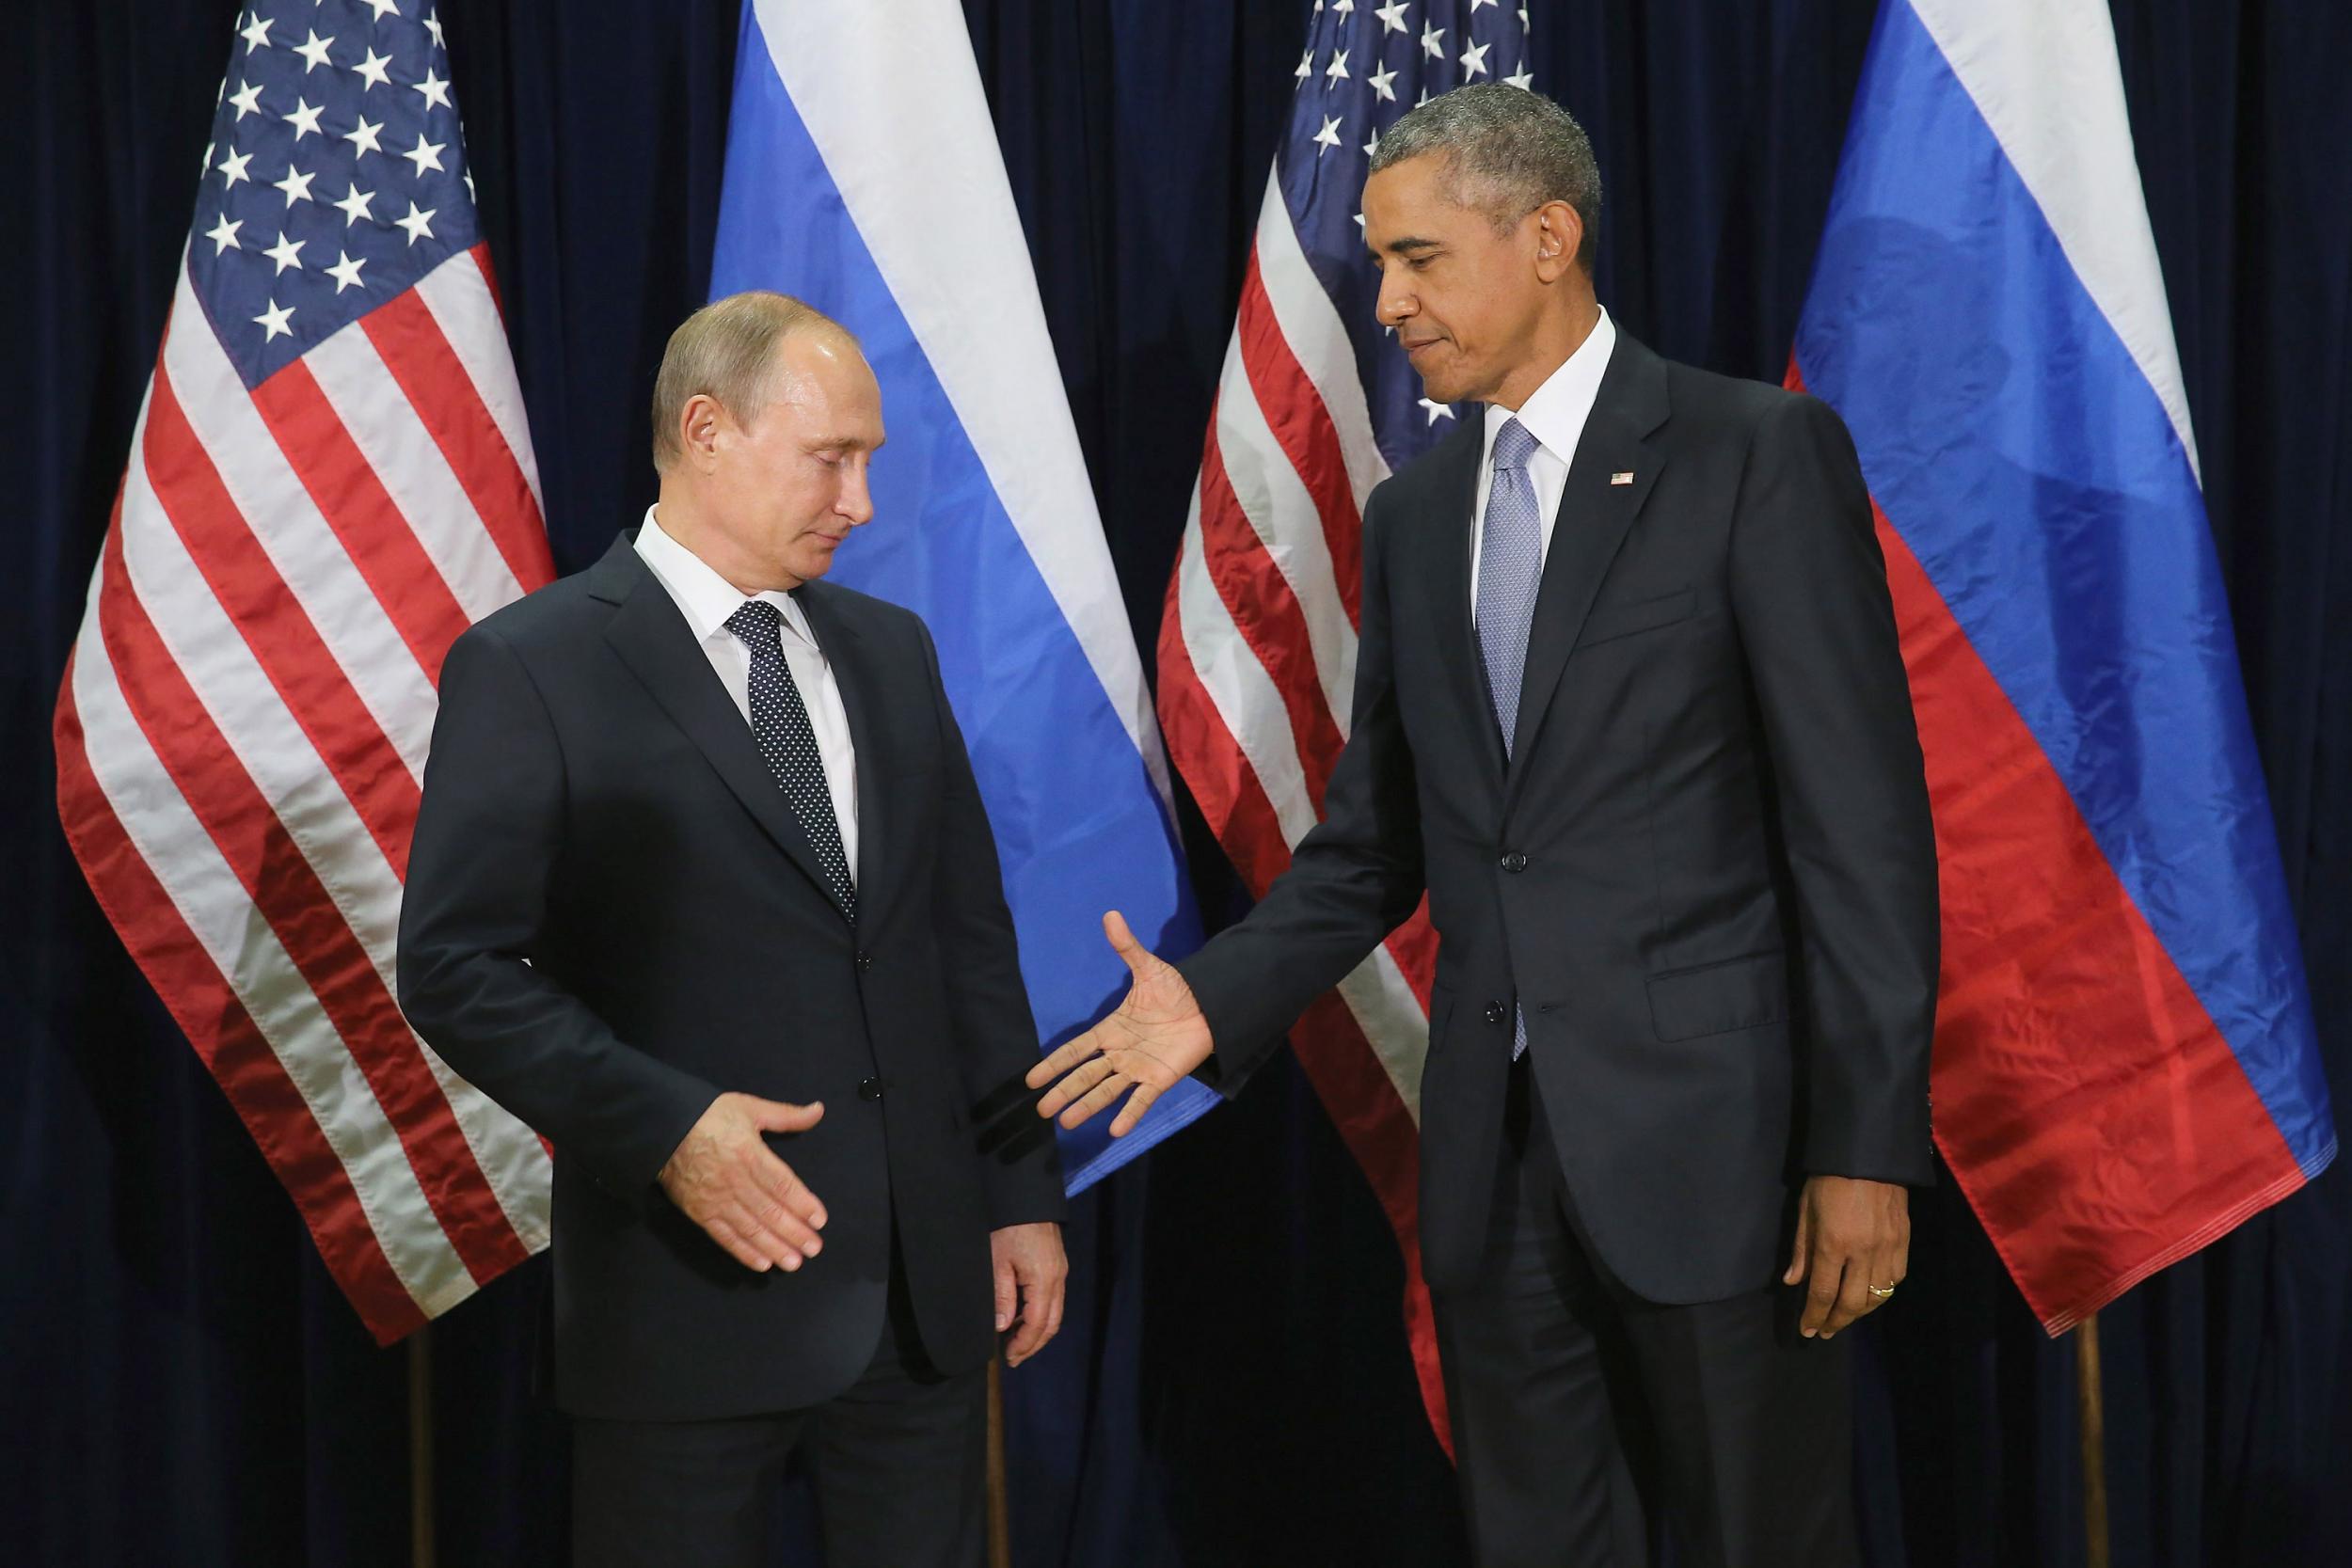 Tension between Russia and the US has been mounting for weeks